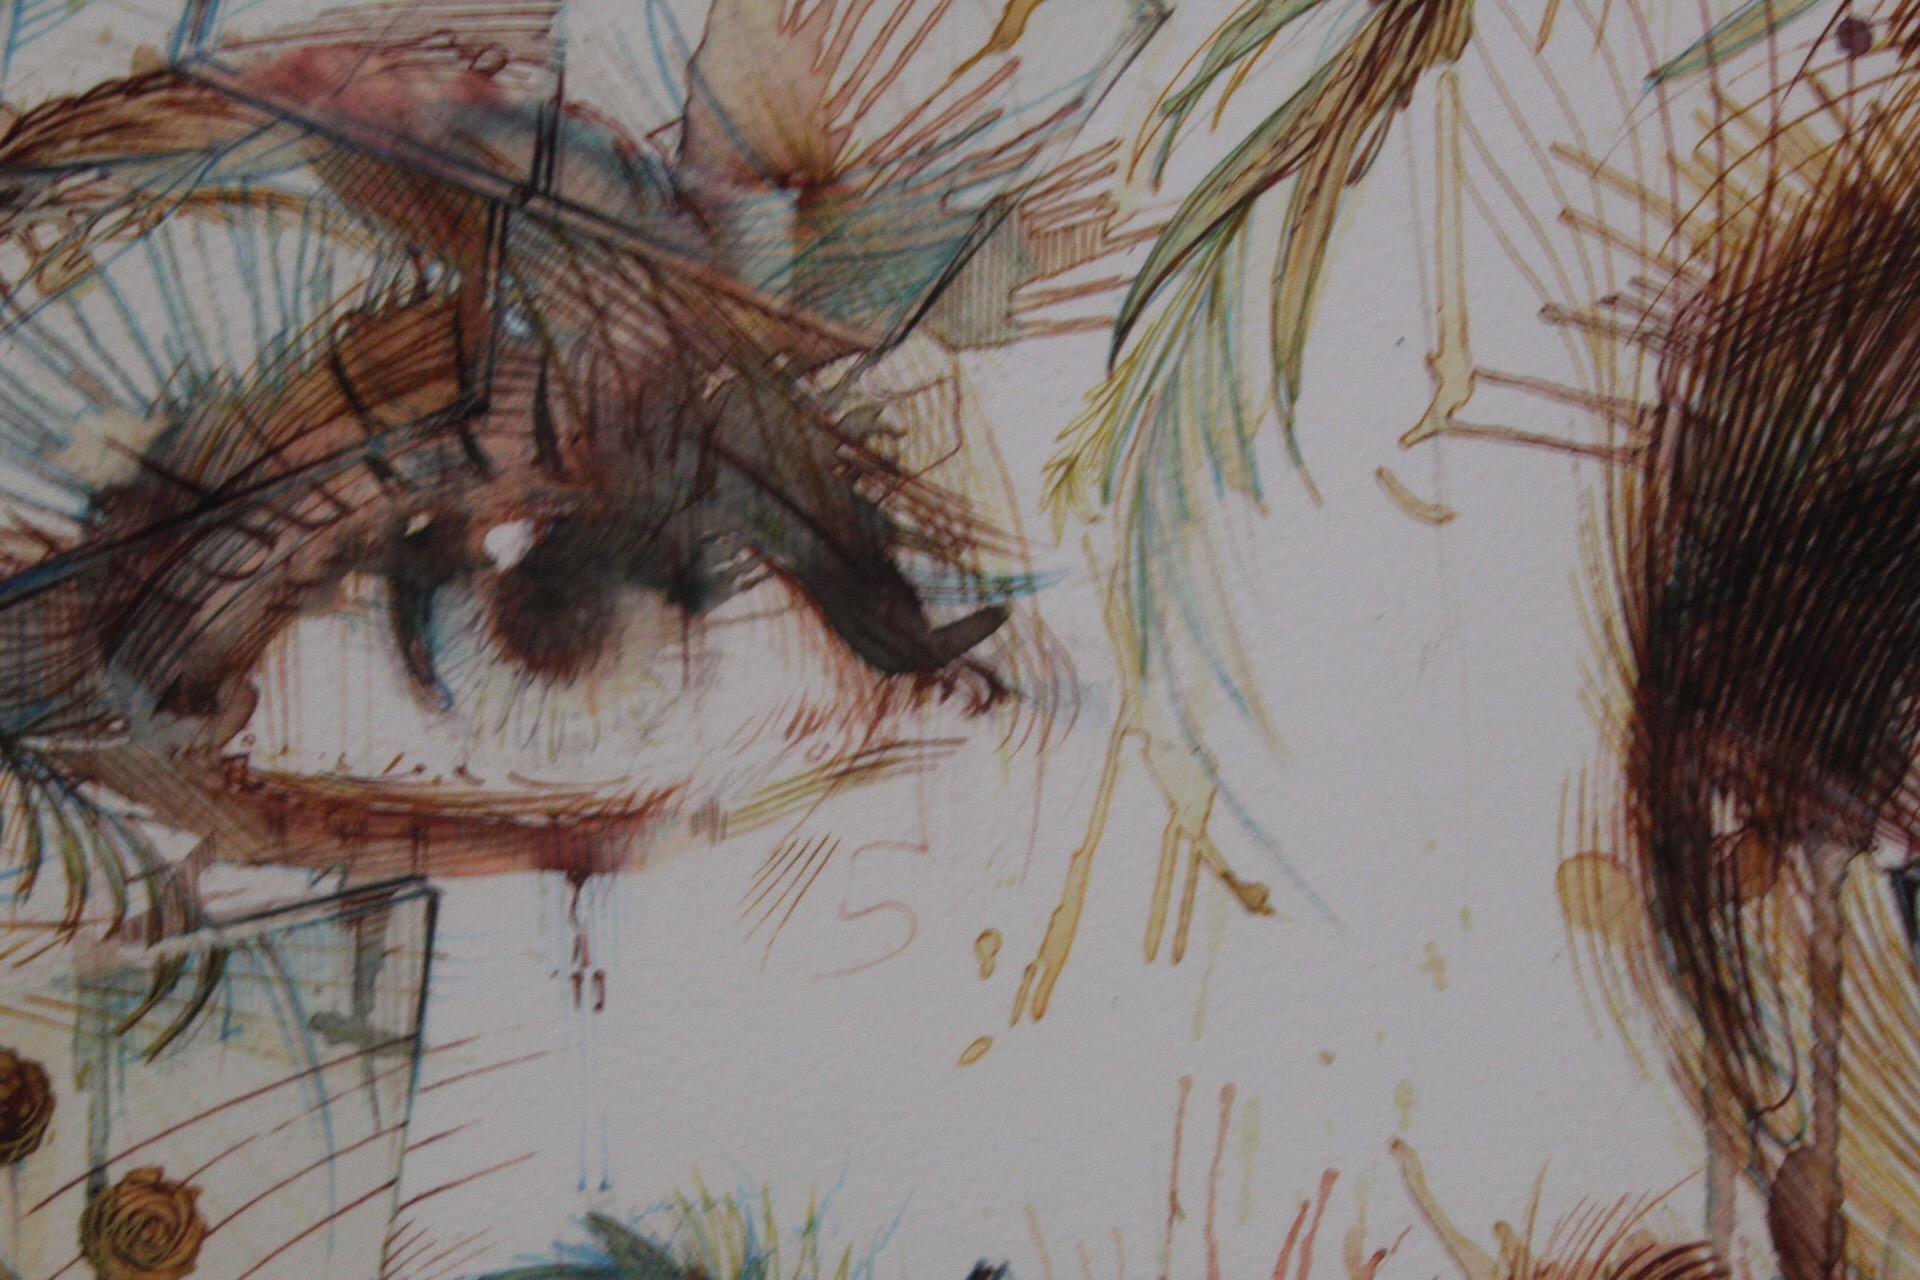 Just Out Of Reach by Carne Griffiths is a Limited Edition Print on 330 gsm Somerset Paper with hand torn edges and is signed and editioned by the artist.
Edition of 50.
Print Medium: Giclee with screenprints varnish layers and 24 carat gold